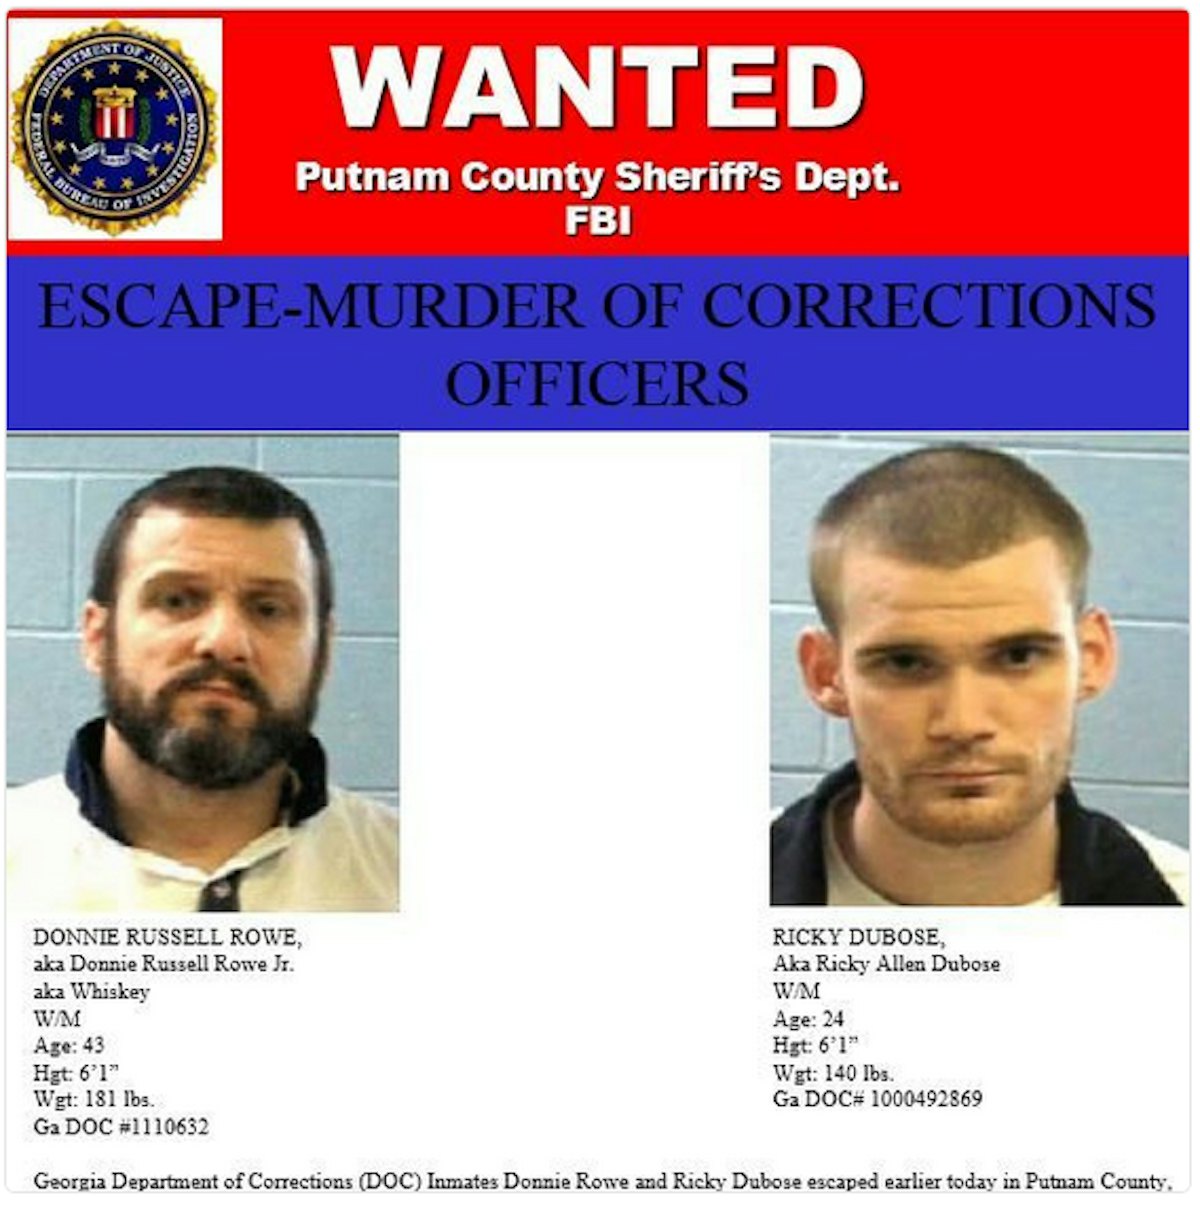 Escaped Prisoners Take Selfies, Video During Nationwide Manhunt 